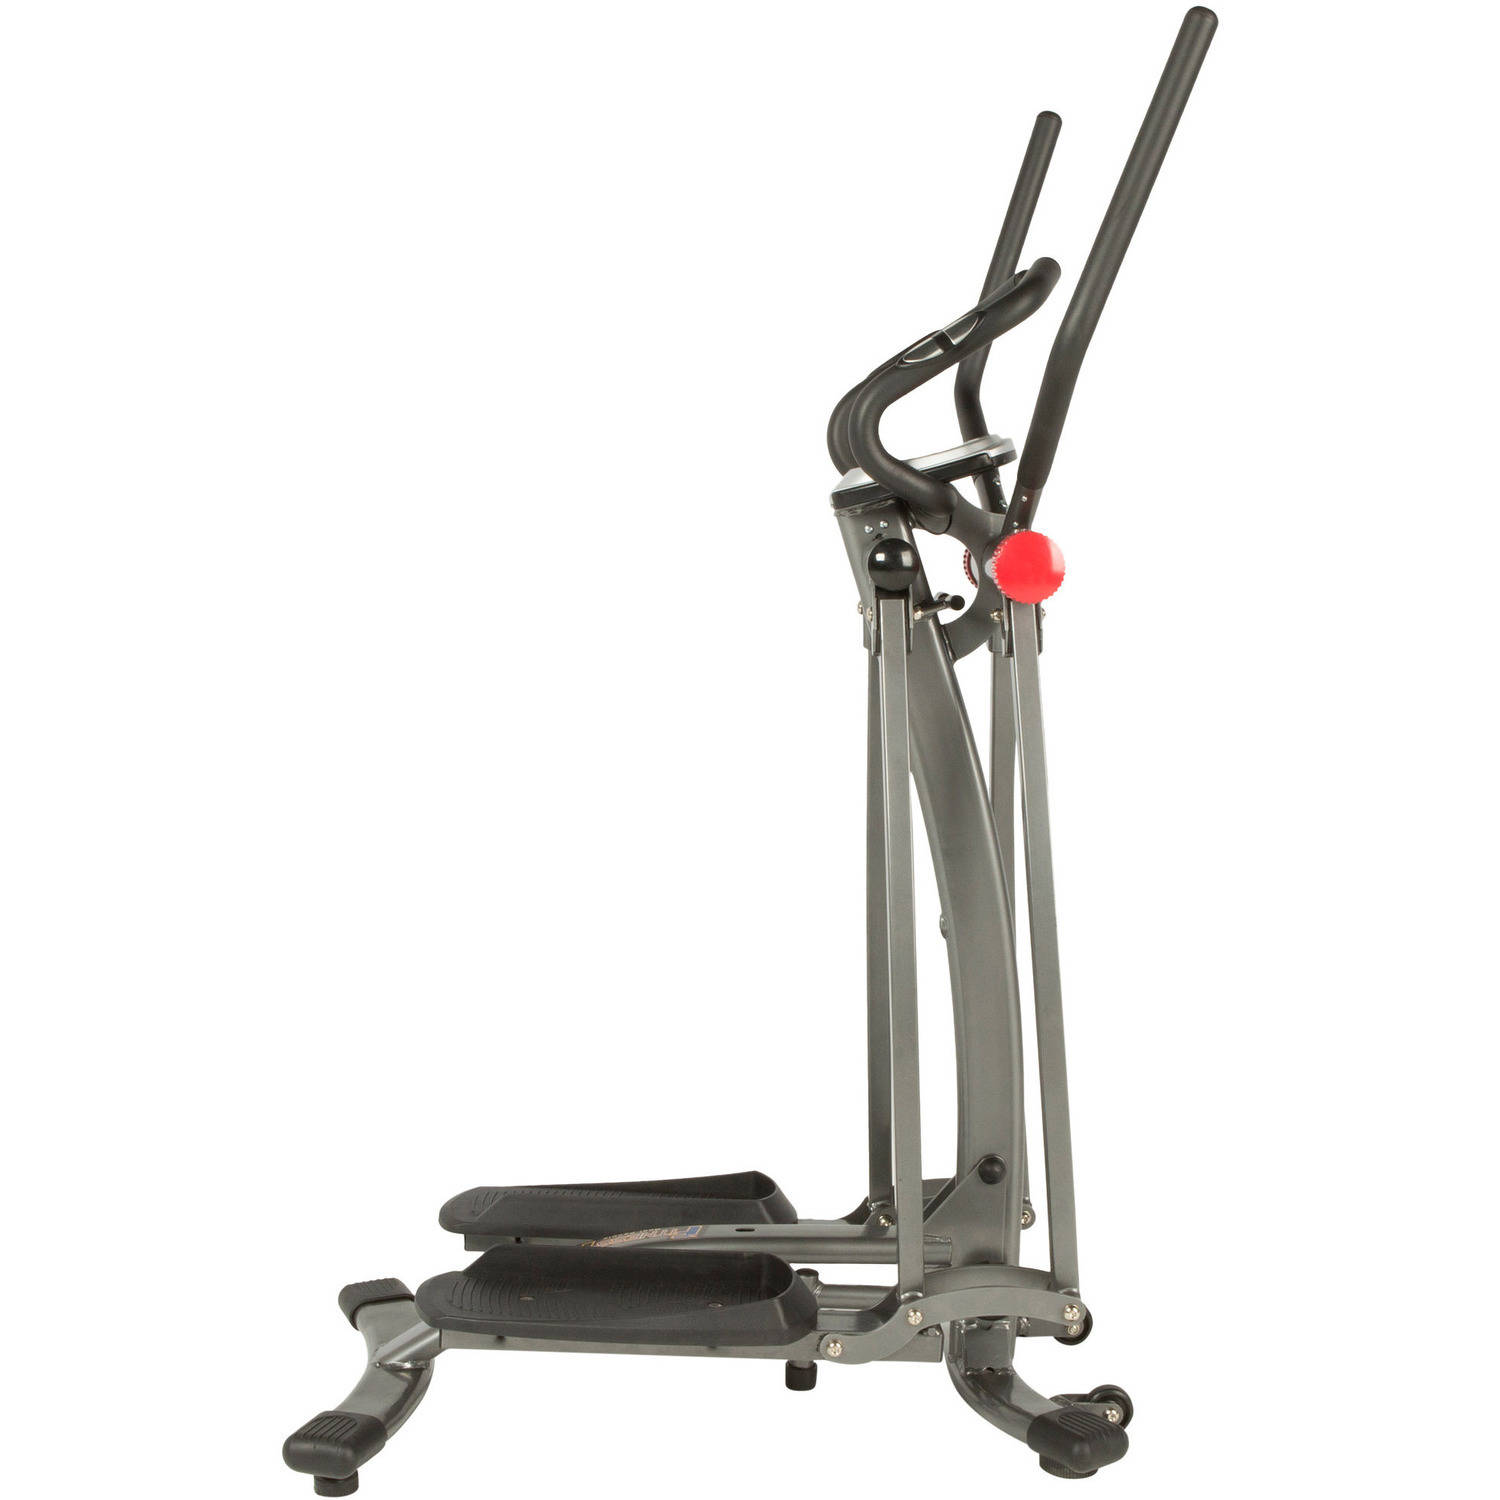 Fitness Reality Multi-Direction Elliptical Cloud Walker X1 with Pulse Sensors - image 28 of 31